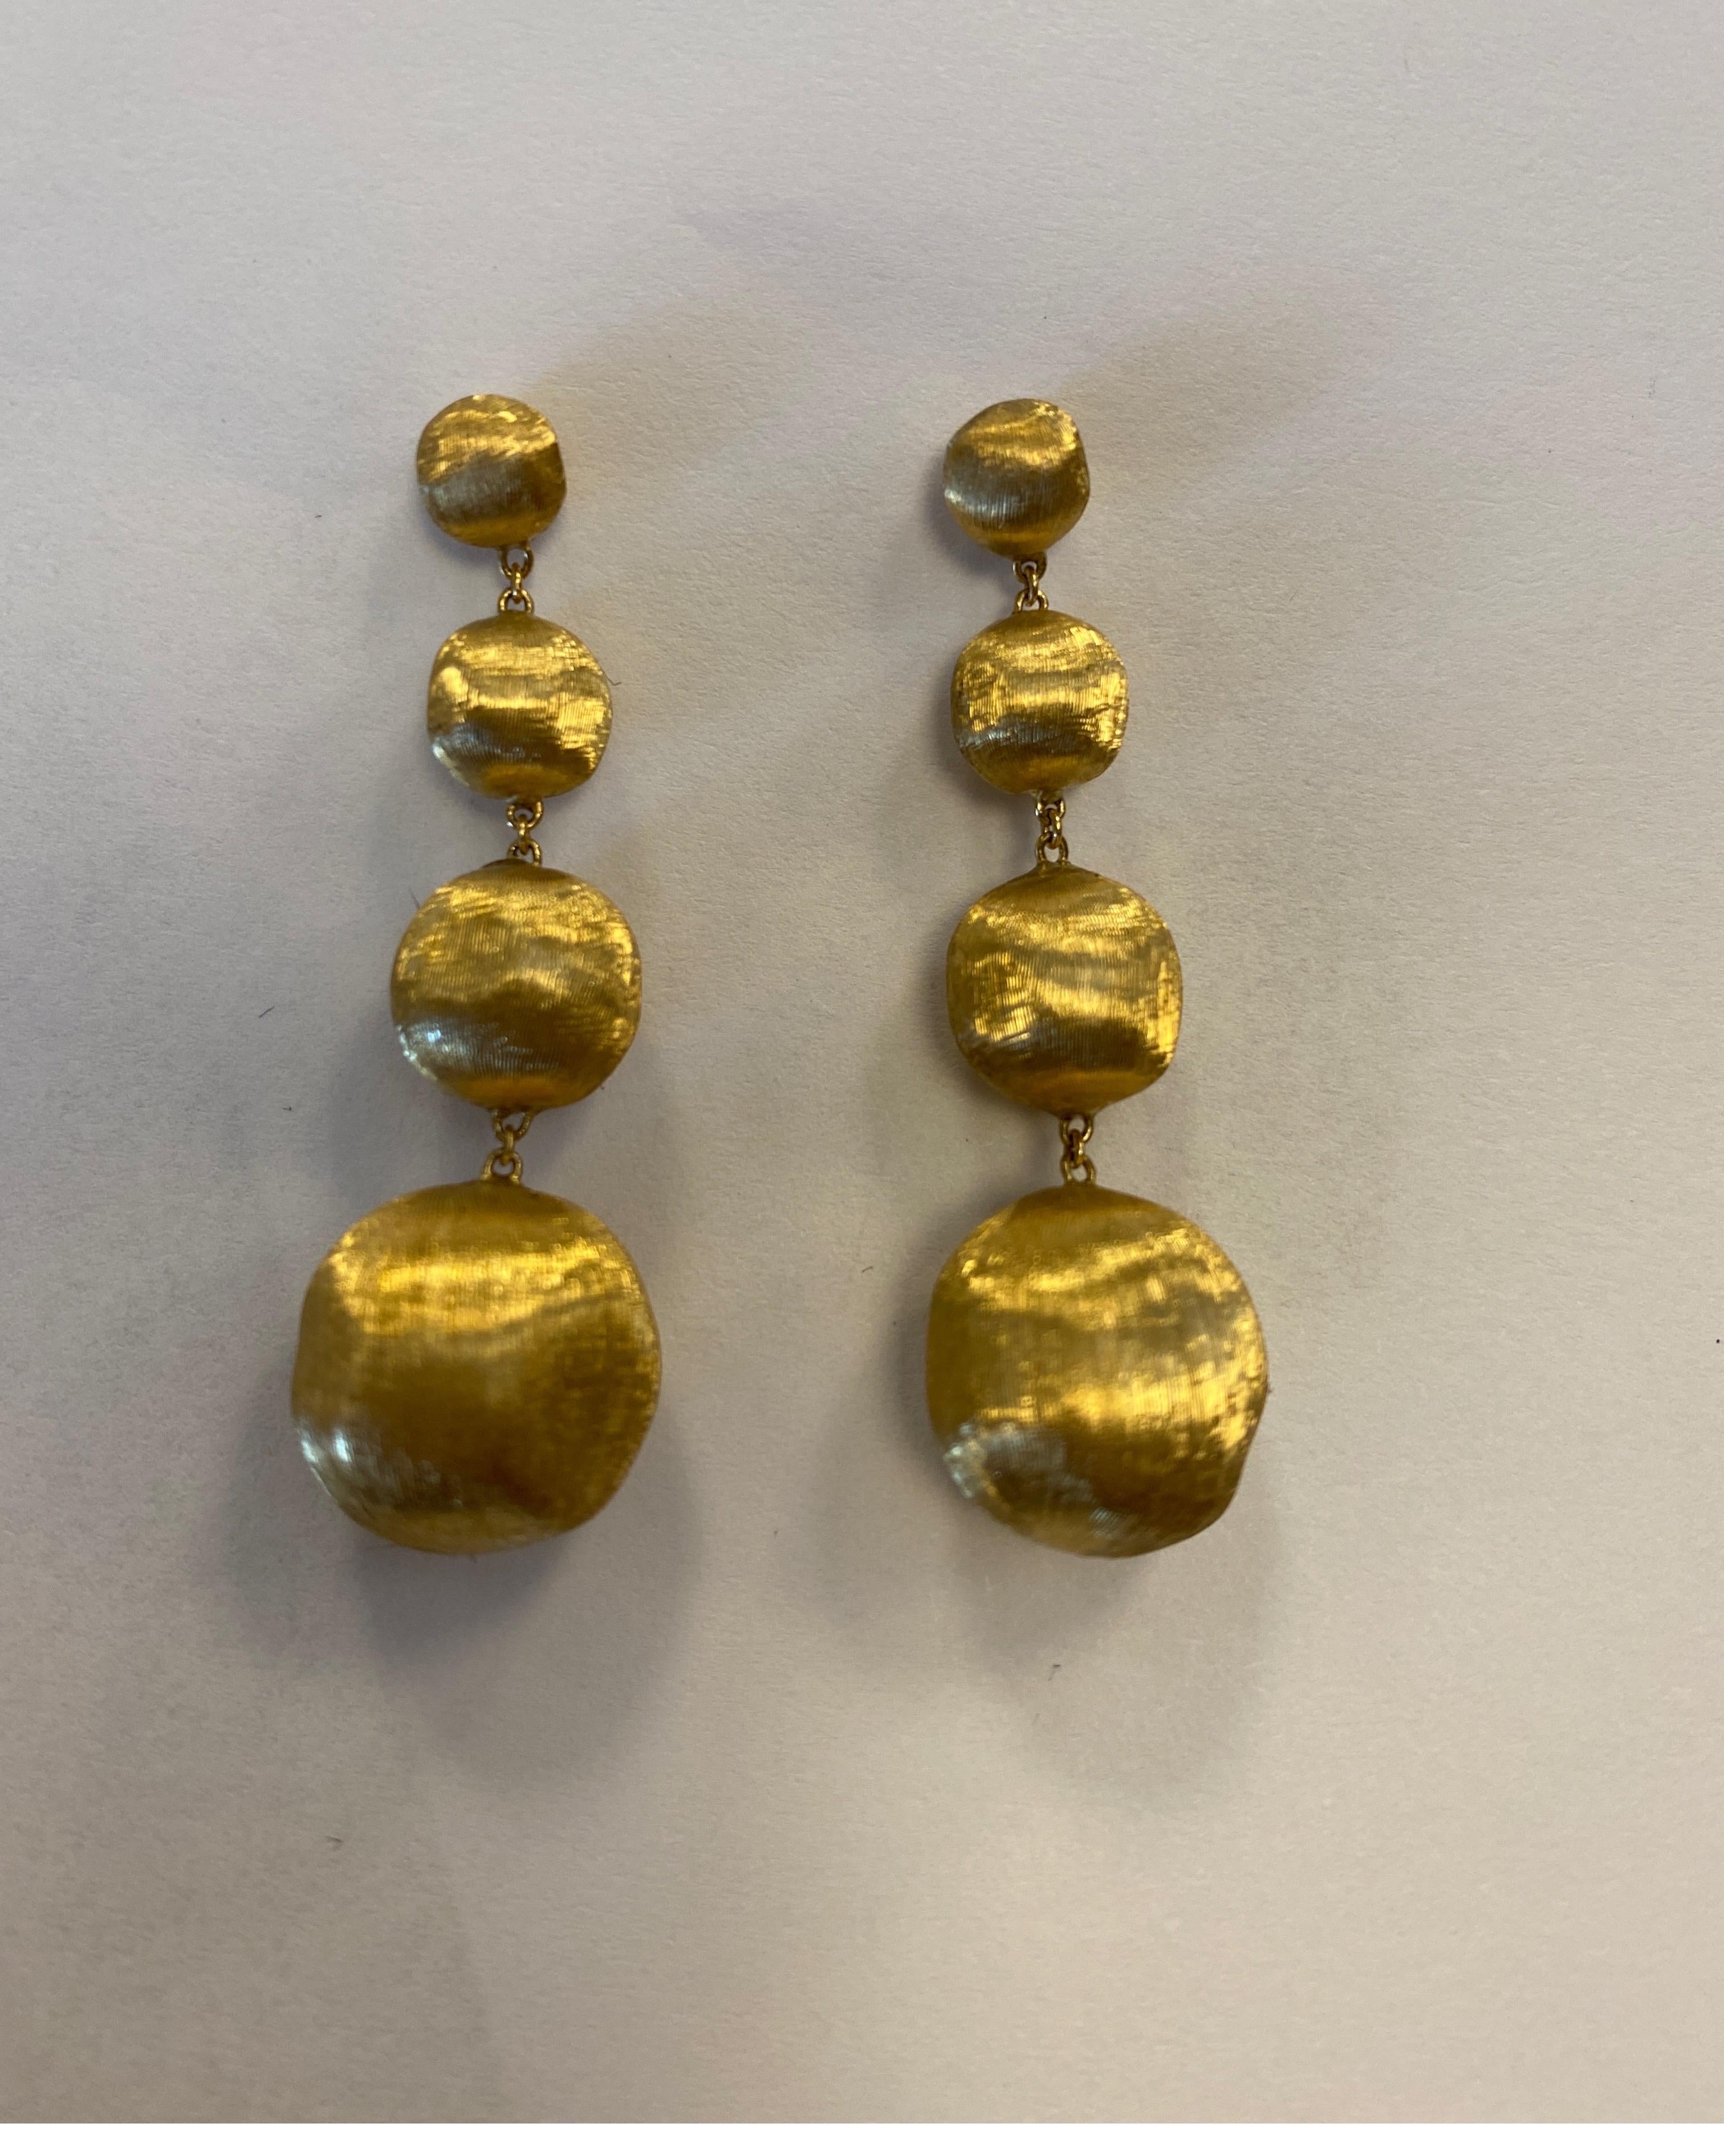 18K yellow gold Marco Bicego drop earrings from the Africa collection
Retail $2370